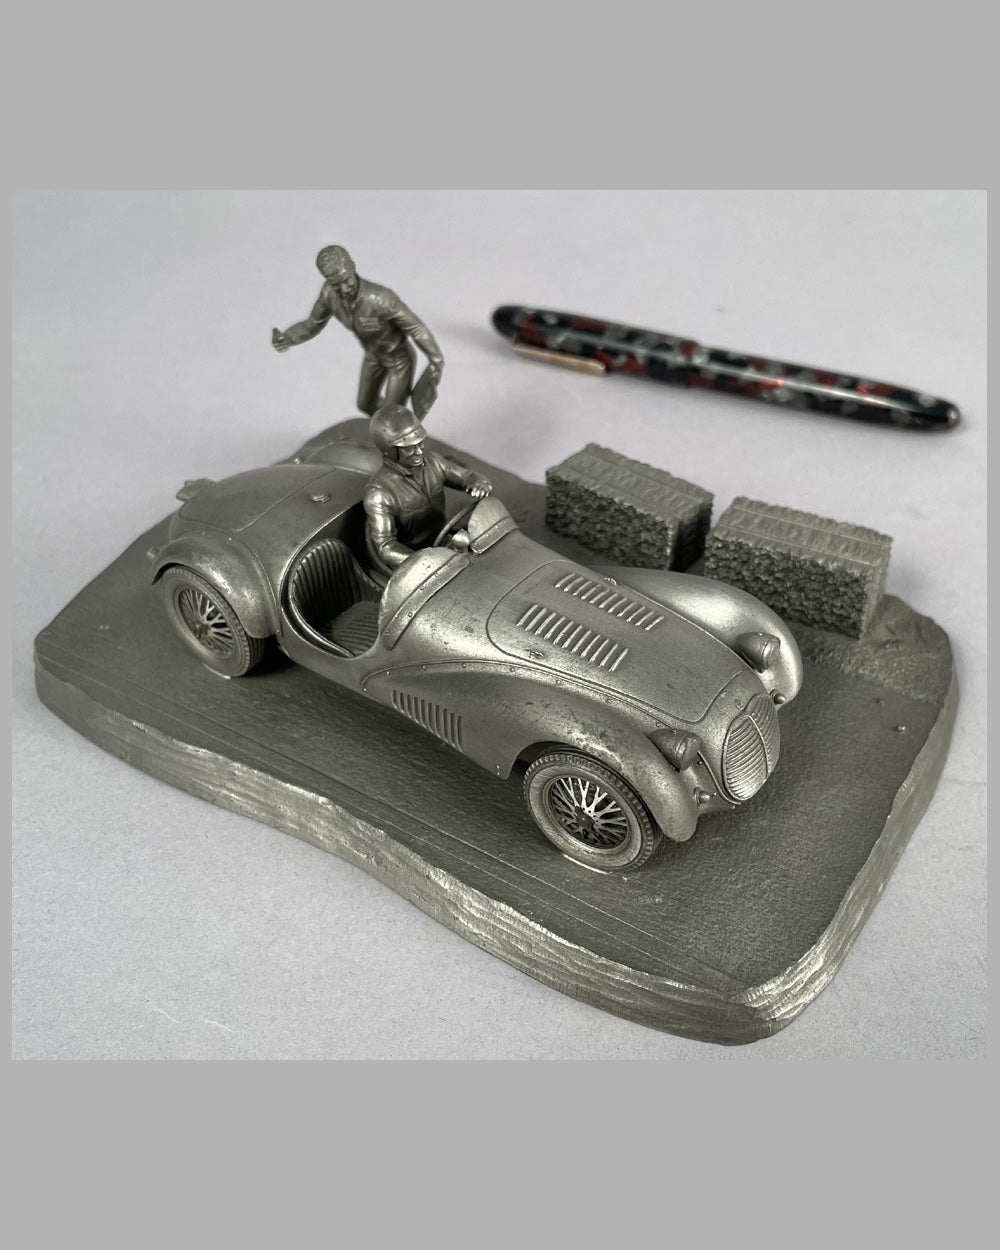 "Into the Straight" pewter sculpture by Raymond Meyers - 1979